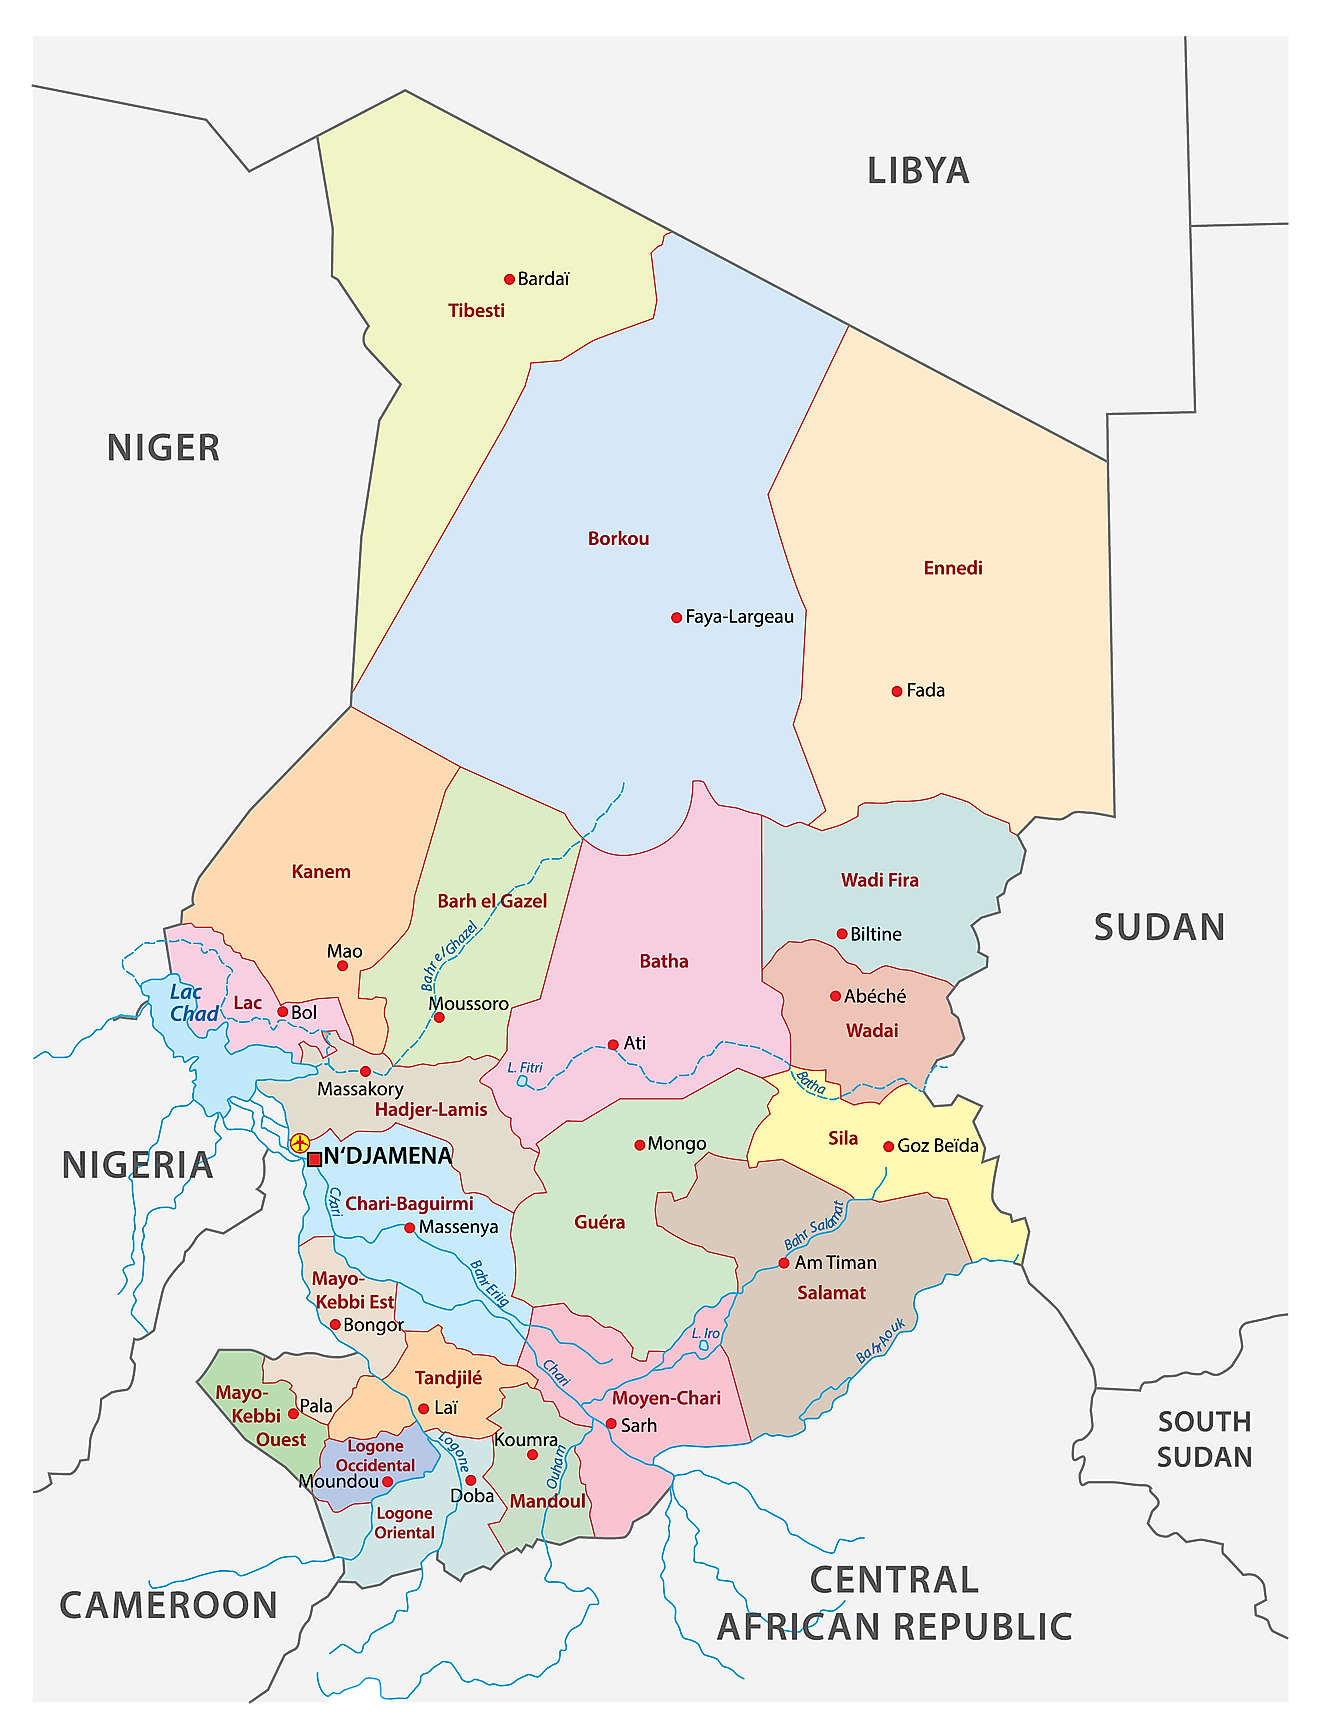 Political map of Chad showing the 23 regions of the country, their capital cities including the national capital of N’Djamena.